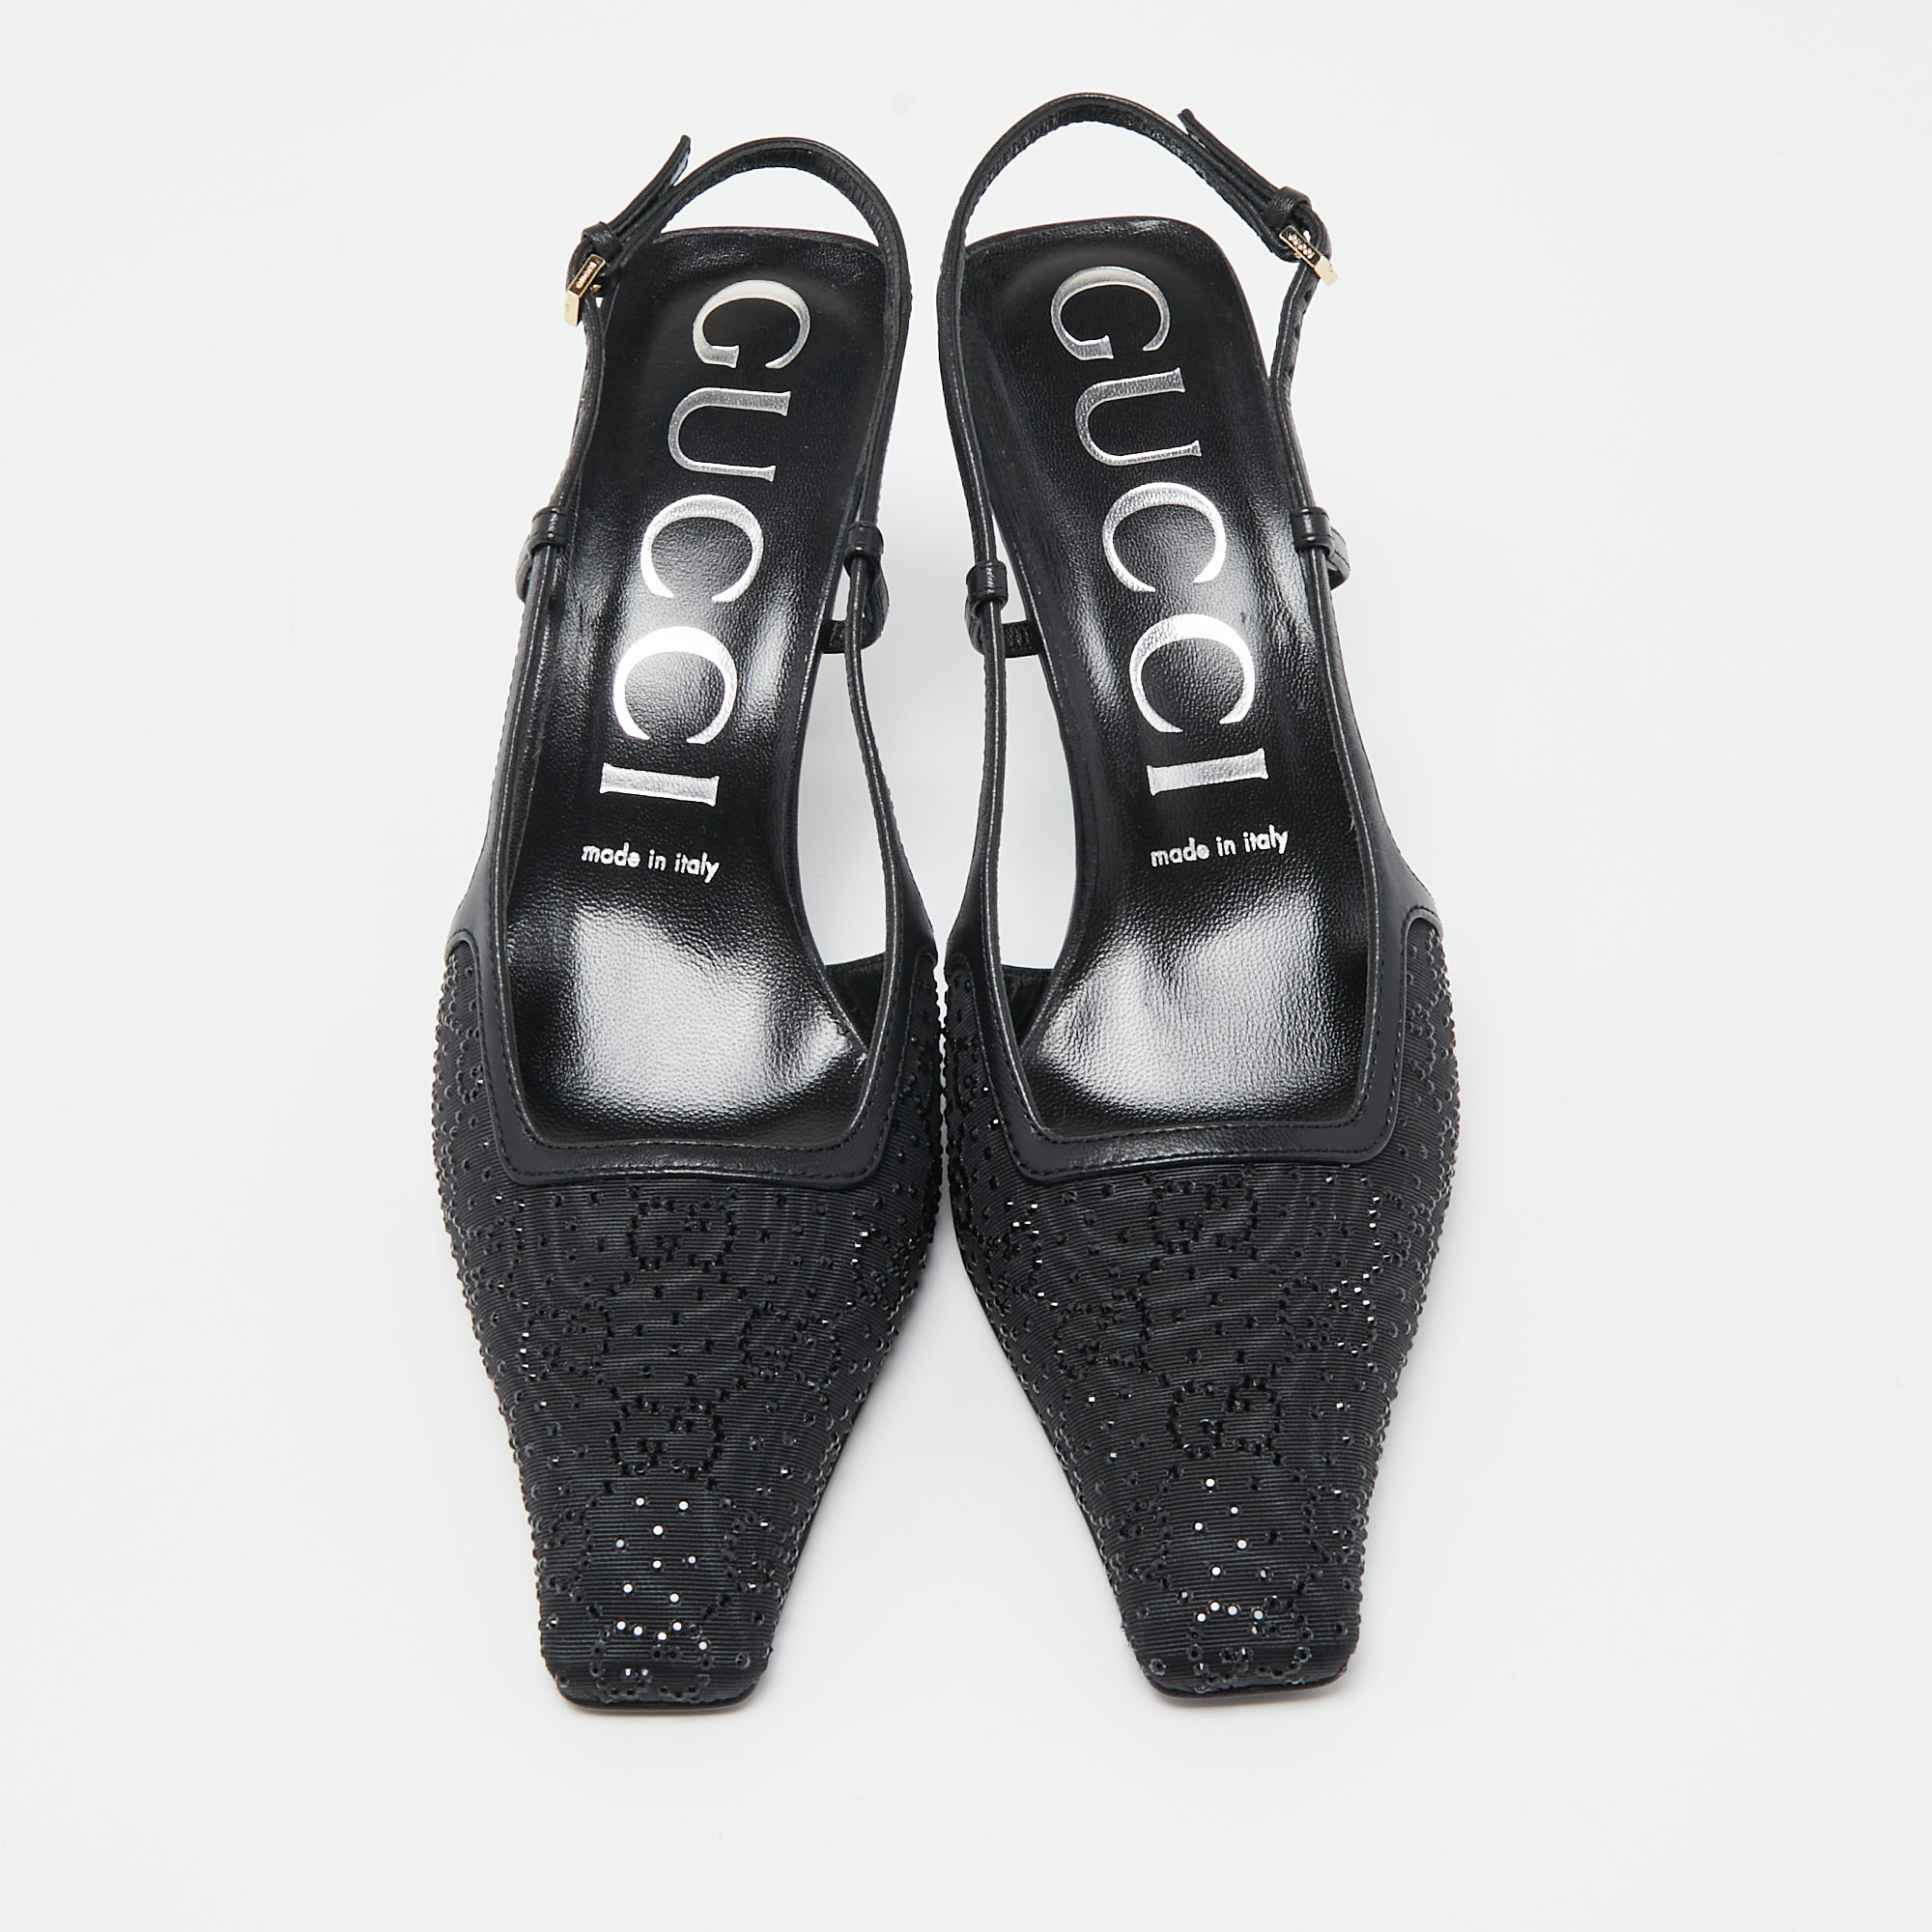 Gucci Black Fabric And Leather Malaga Kid Crystals Slingback Pumps Size 38